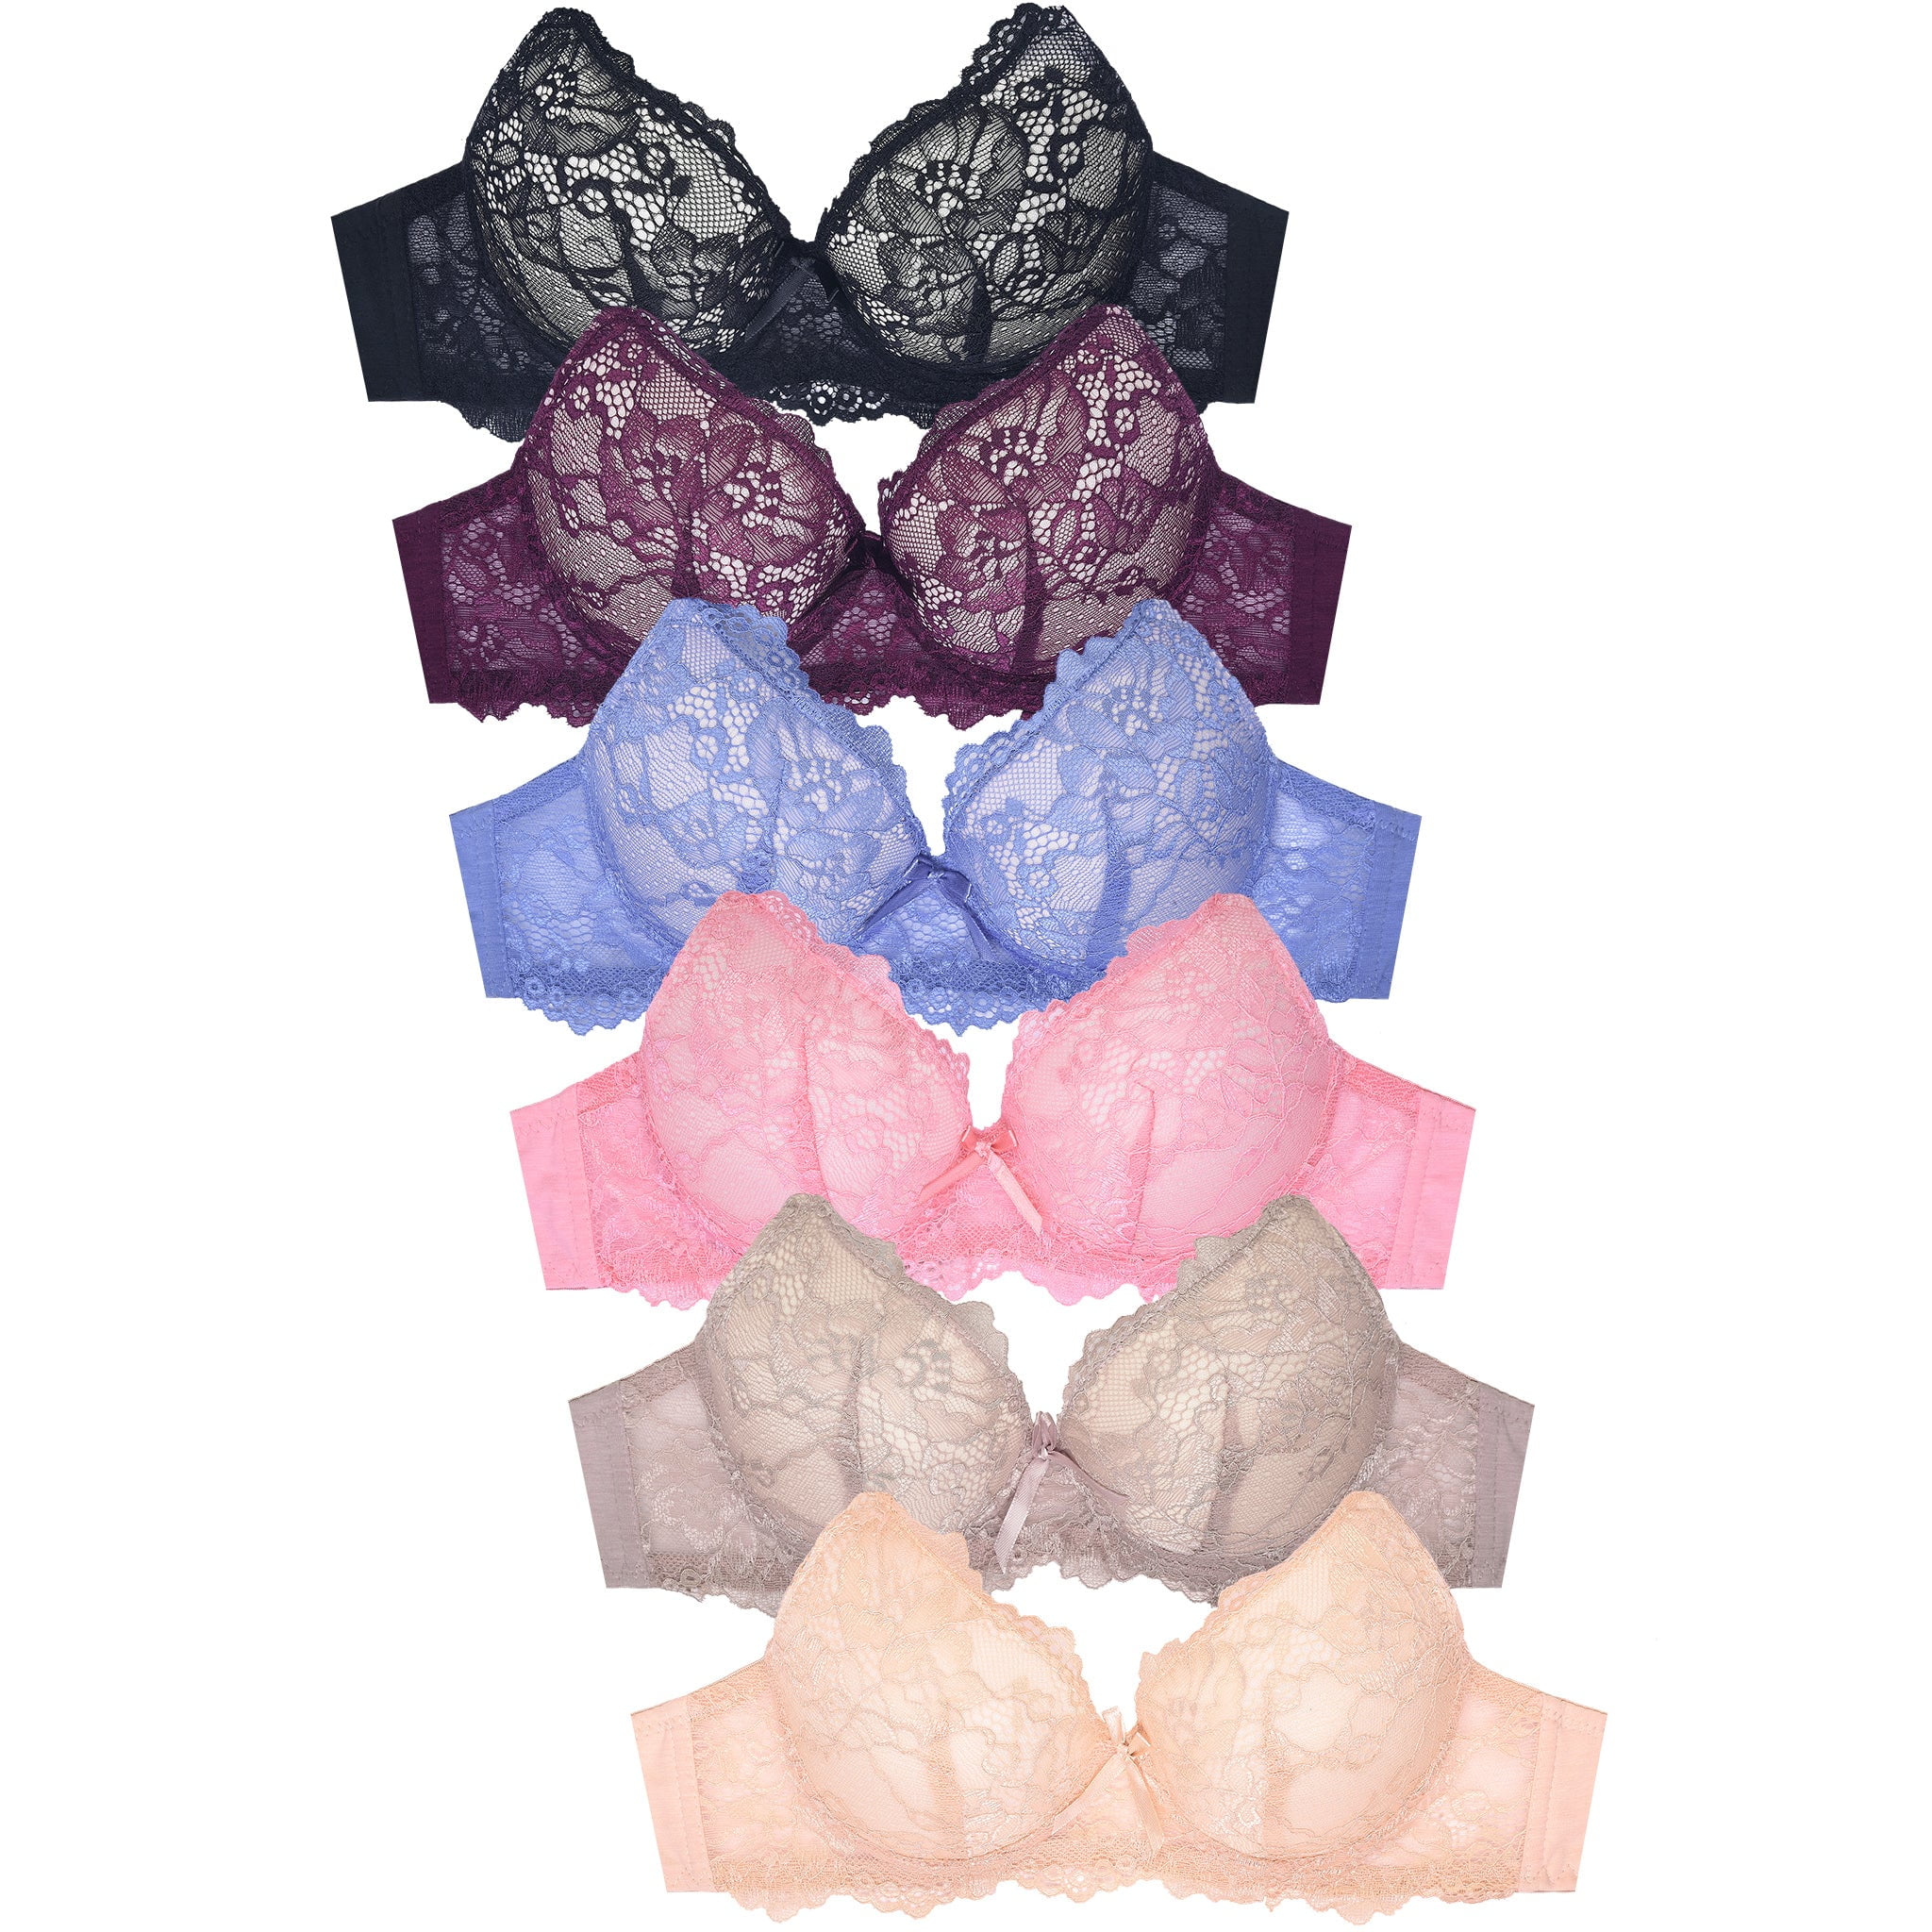 247 Frenzy Women's Essentials Sofra or Mamia PACK OF 6 Full Coverage  Allover Lace Bras 